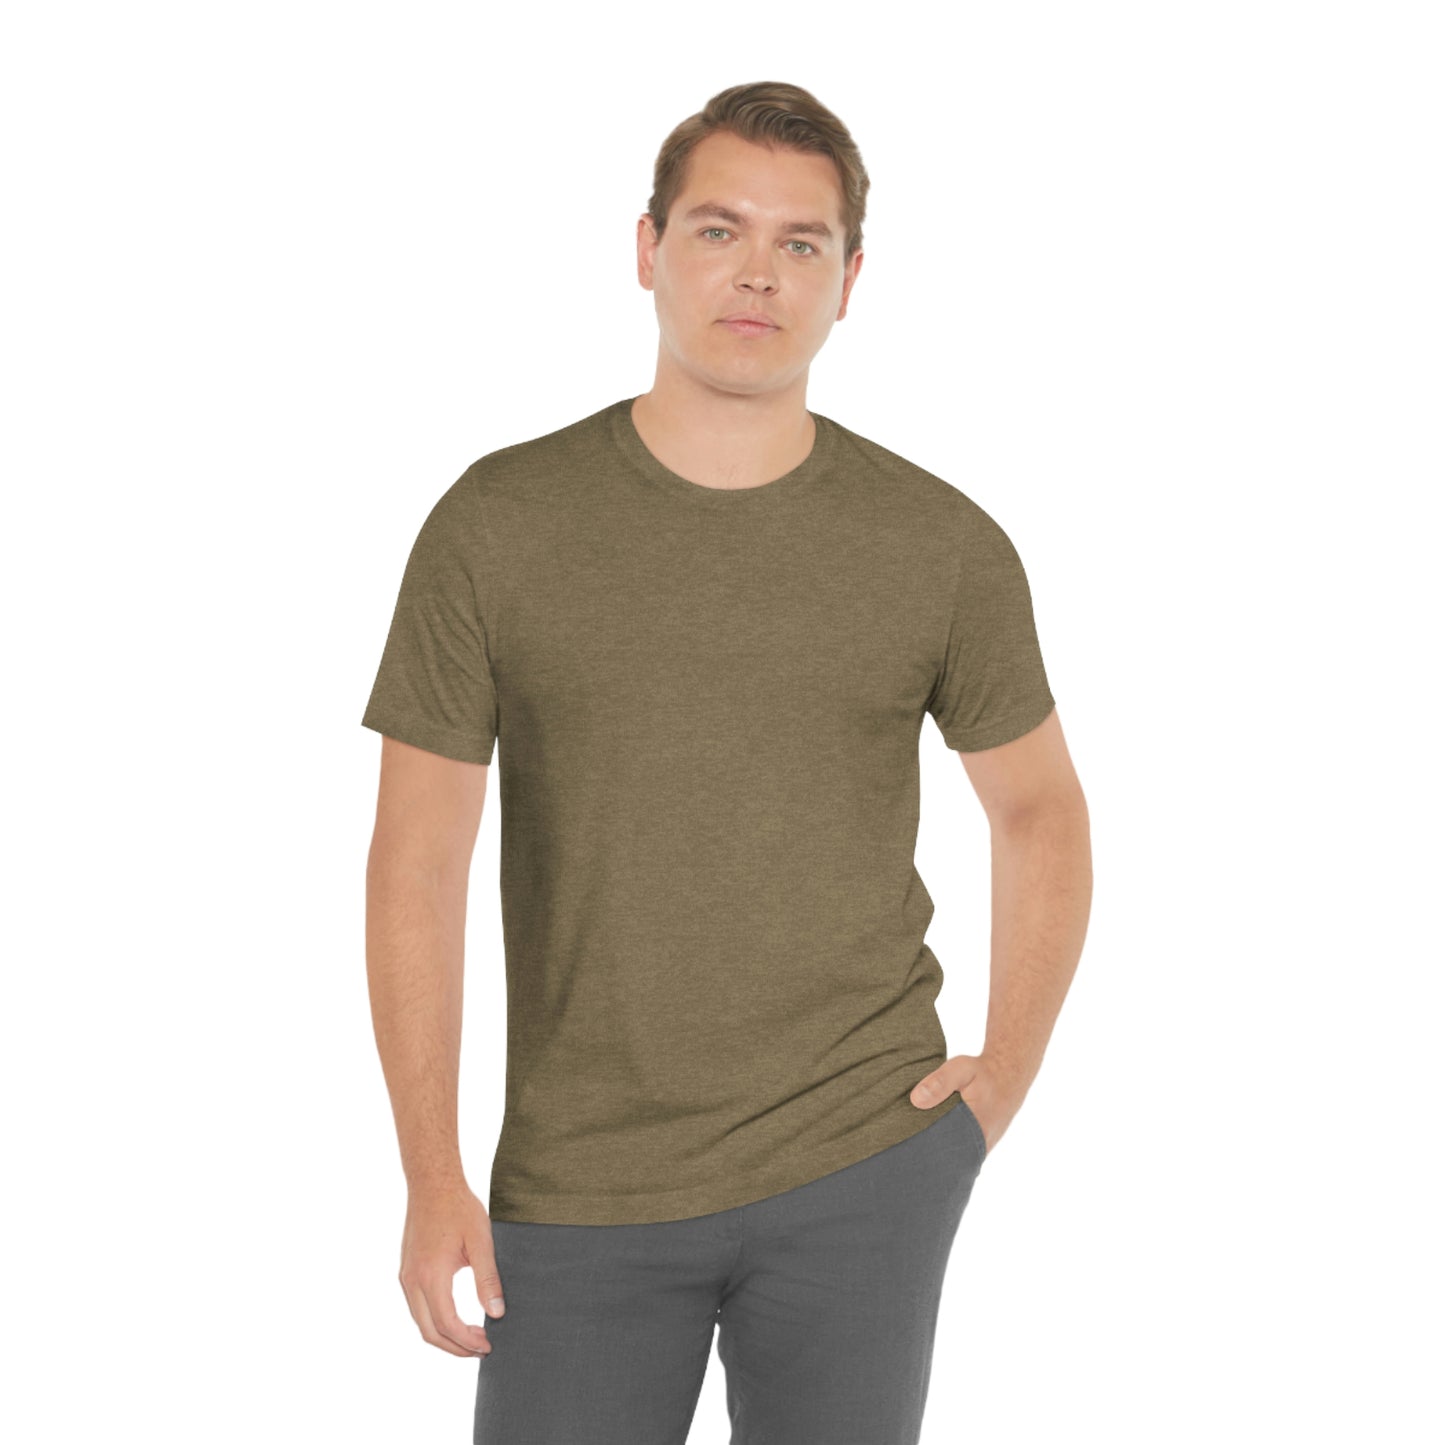 Quality Over Quantity Jersey Short Sleeve Tee